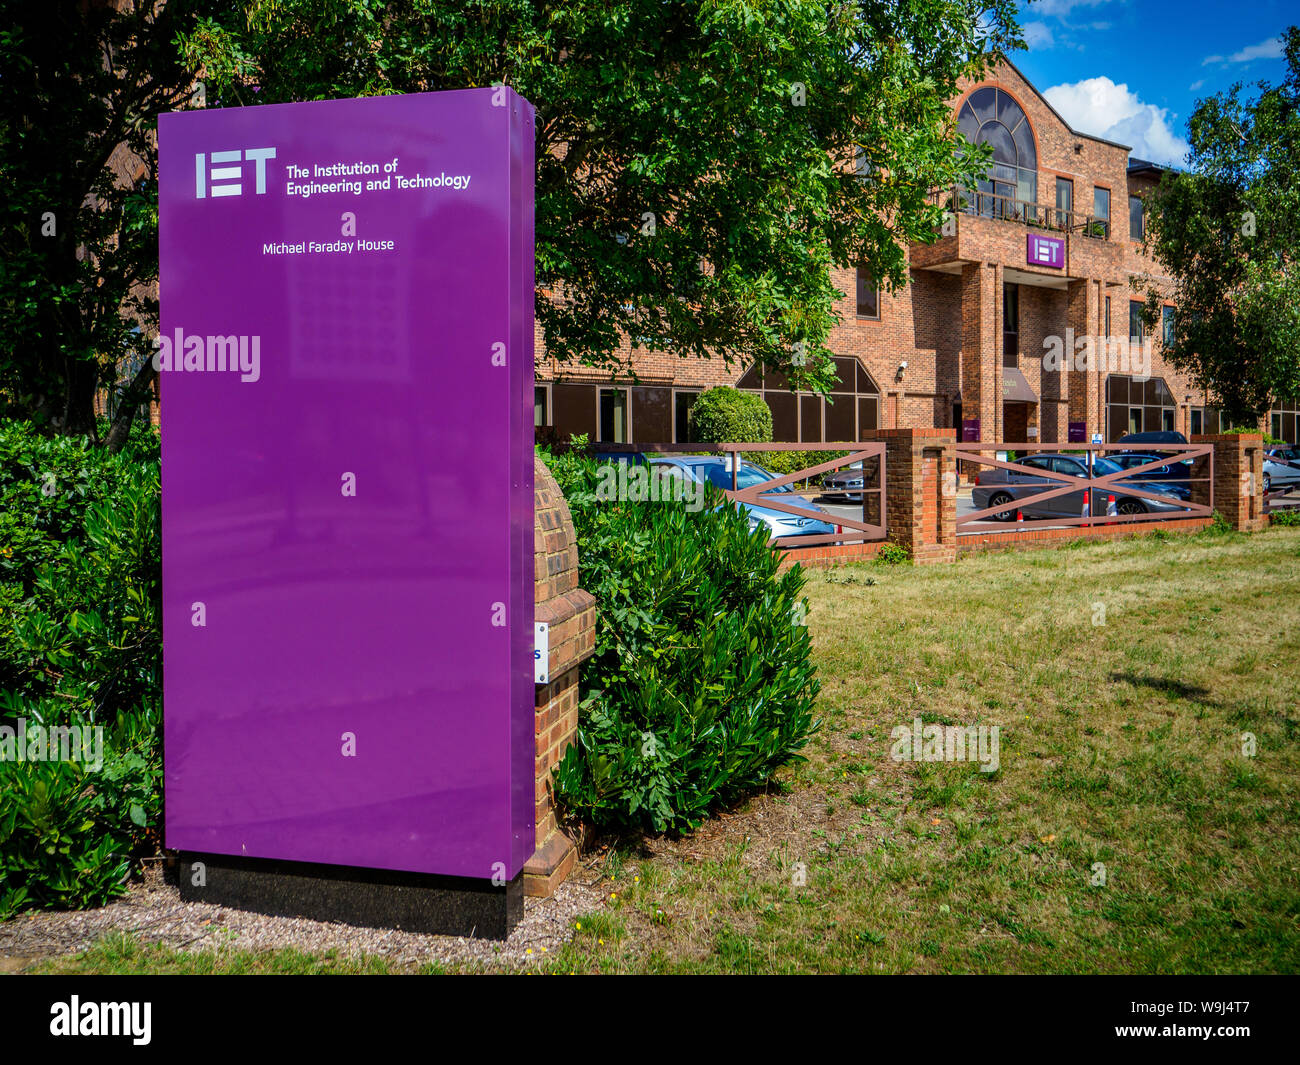 The IET - the Institution of Engineering and Technology in Stevenage UK. Founded as the Society of Telegraph Engineers in 1871 became the IET in 2006. Stock Photo